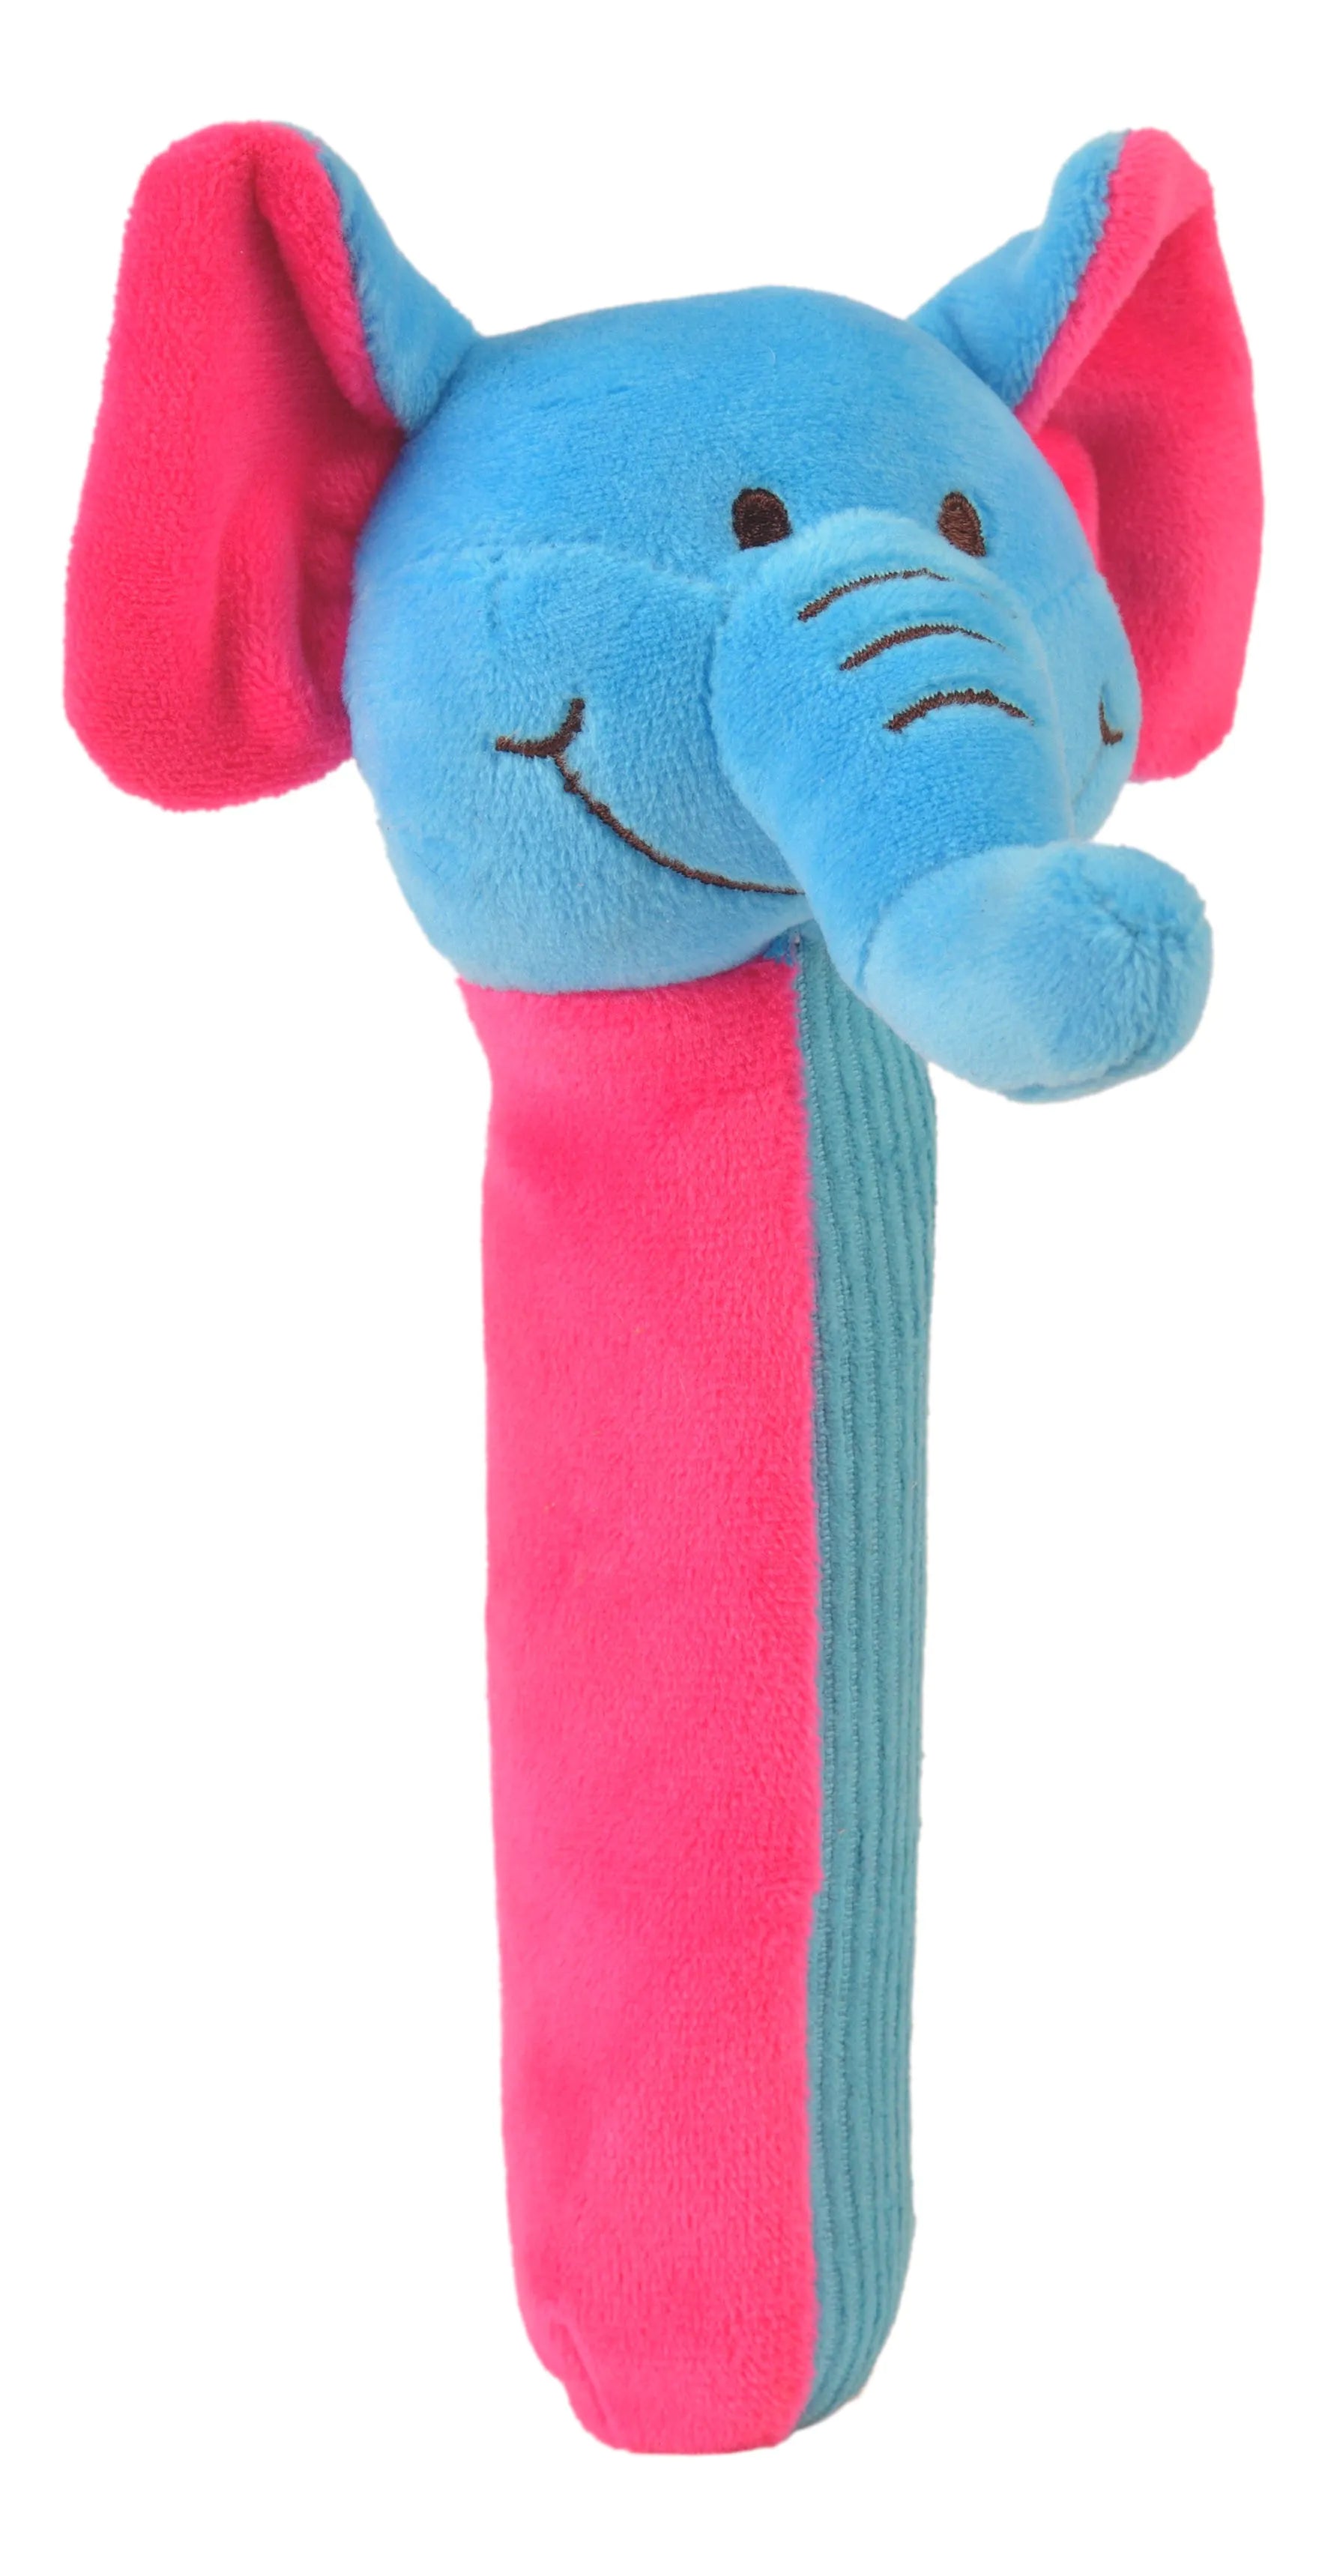 elephant toy - elephant soft toy squeakaboo - shop fiesta crafts at The Toy Room